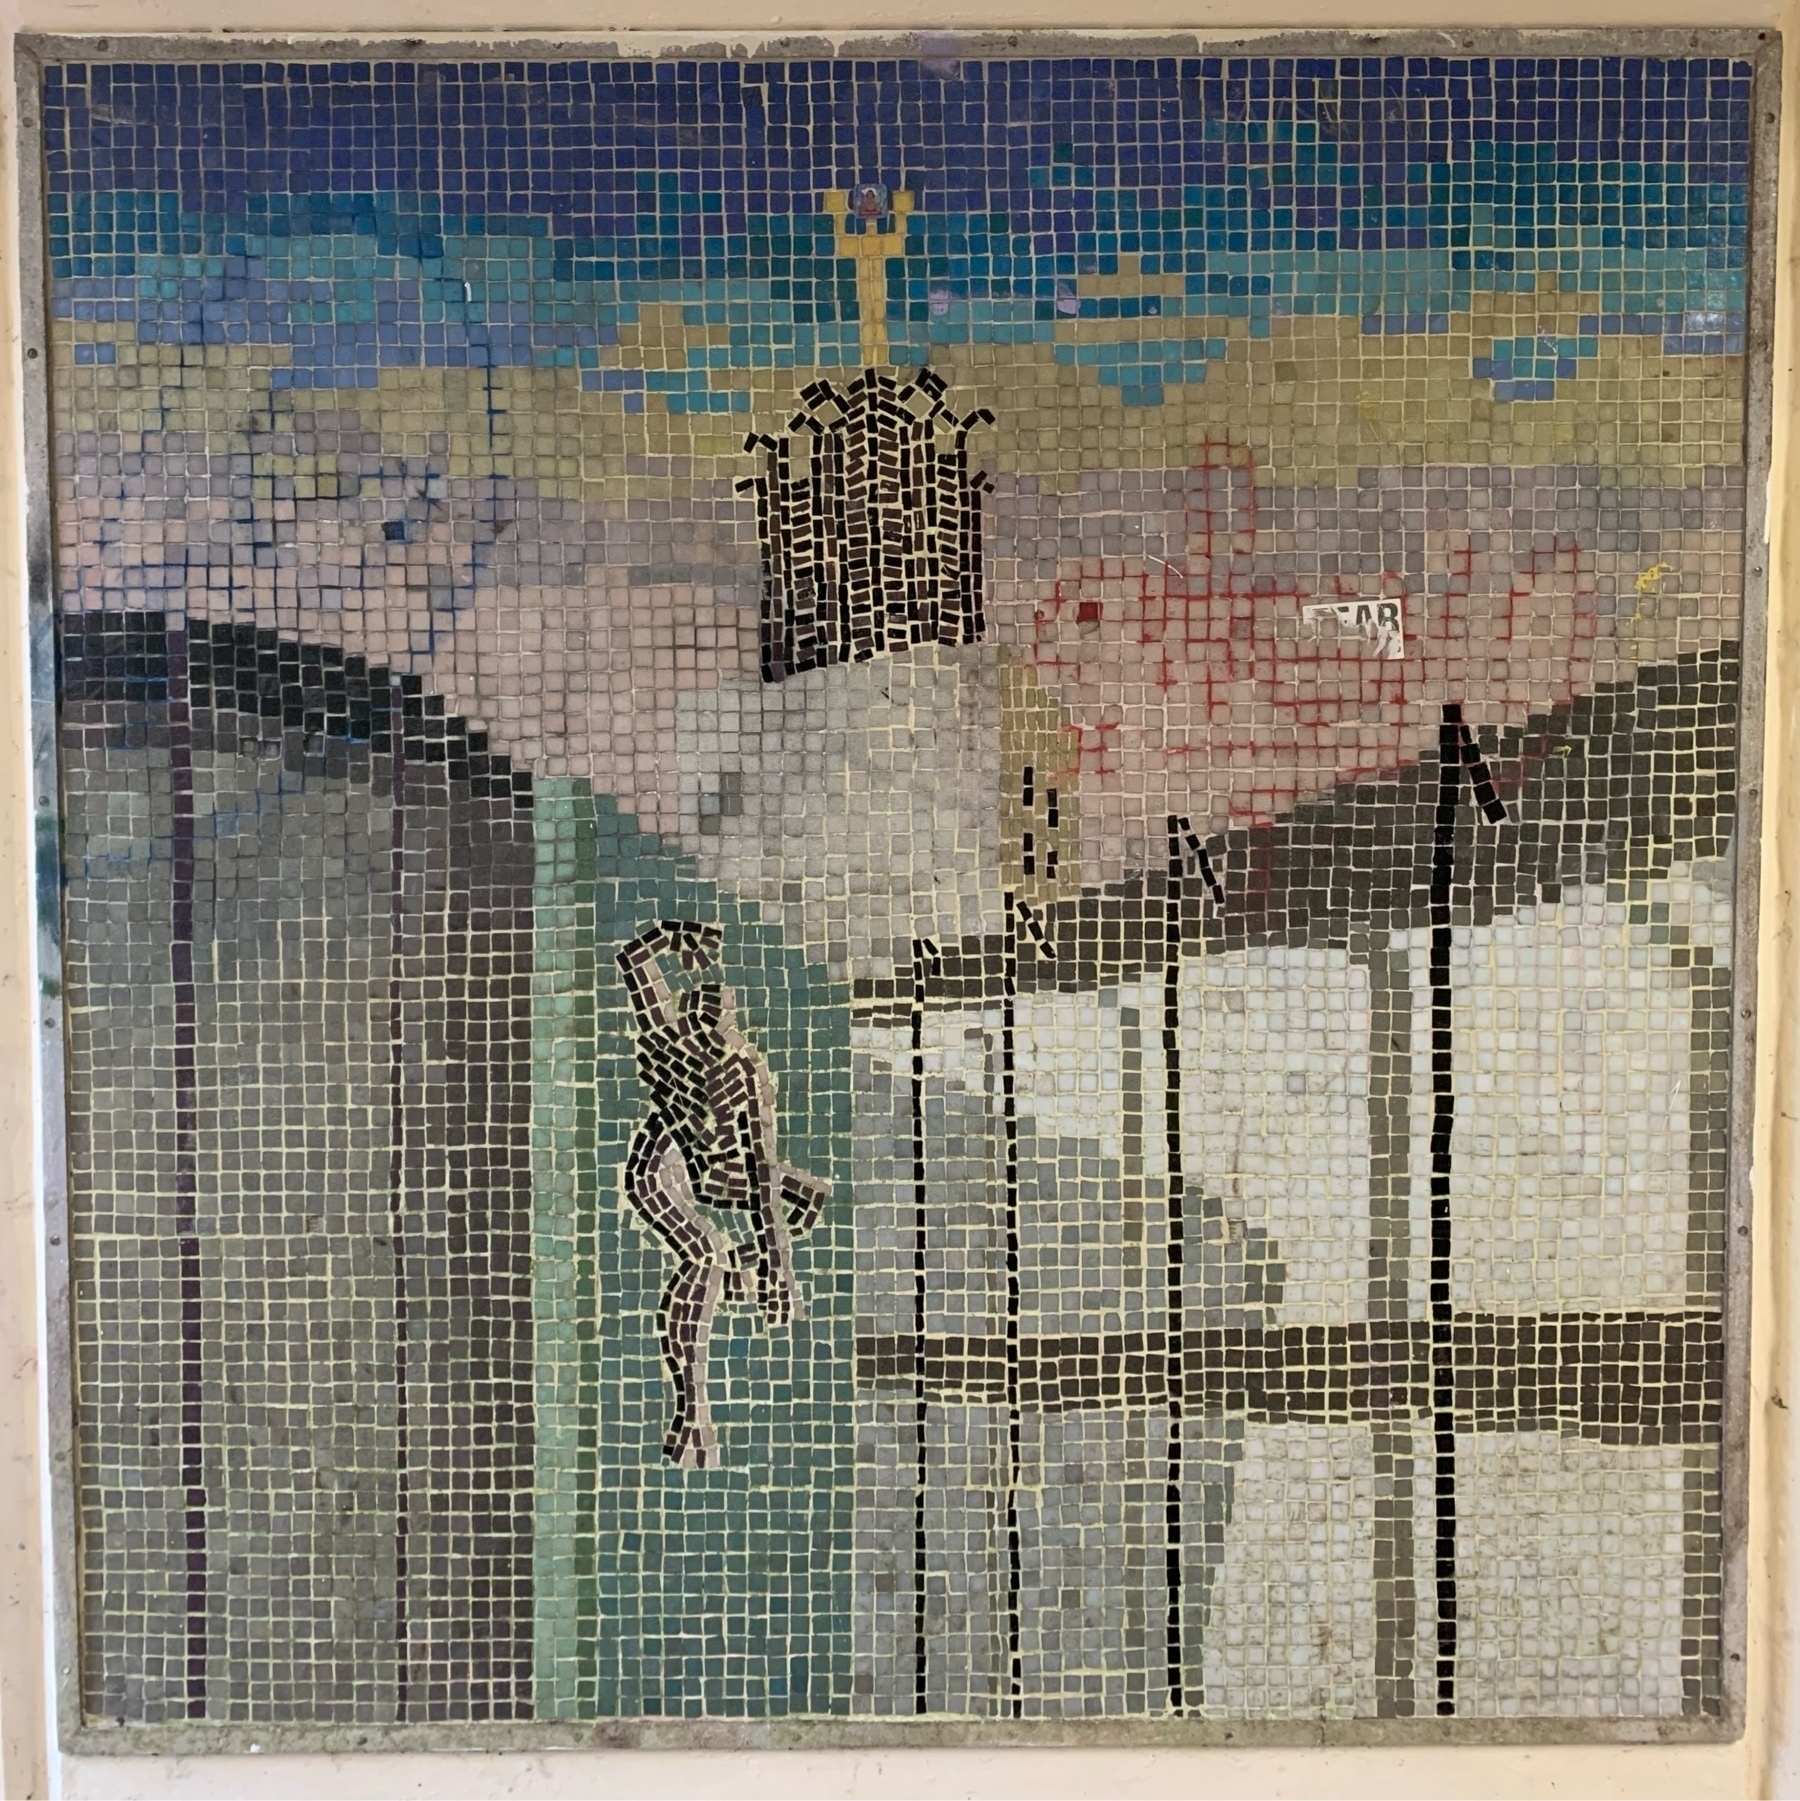 Colourful mosaic depicting Newcastle Civic Centre